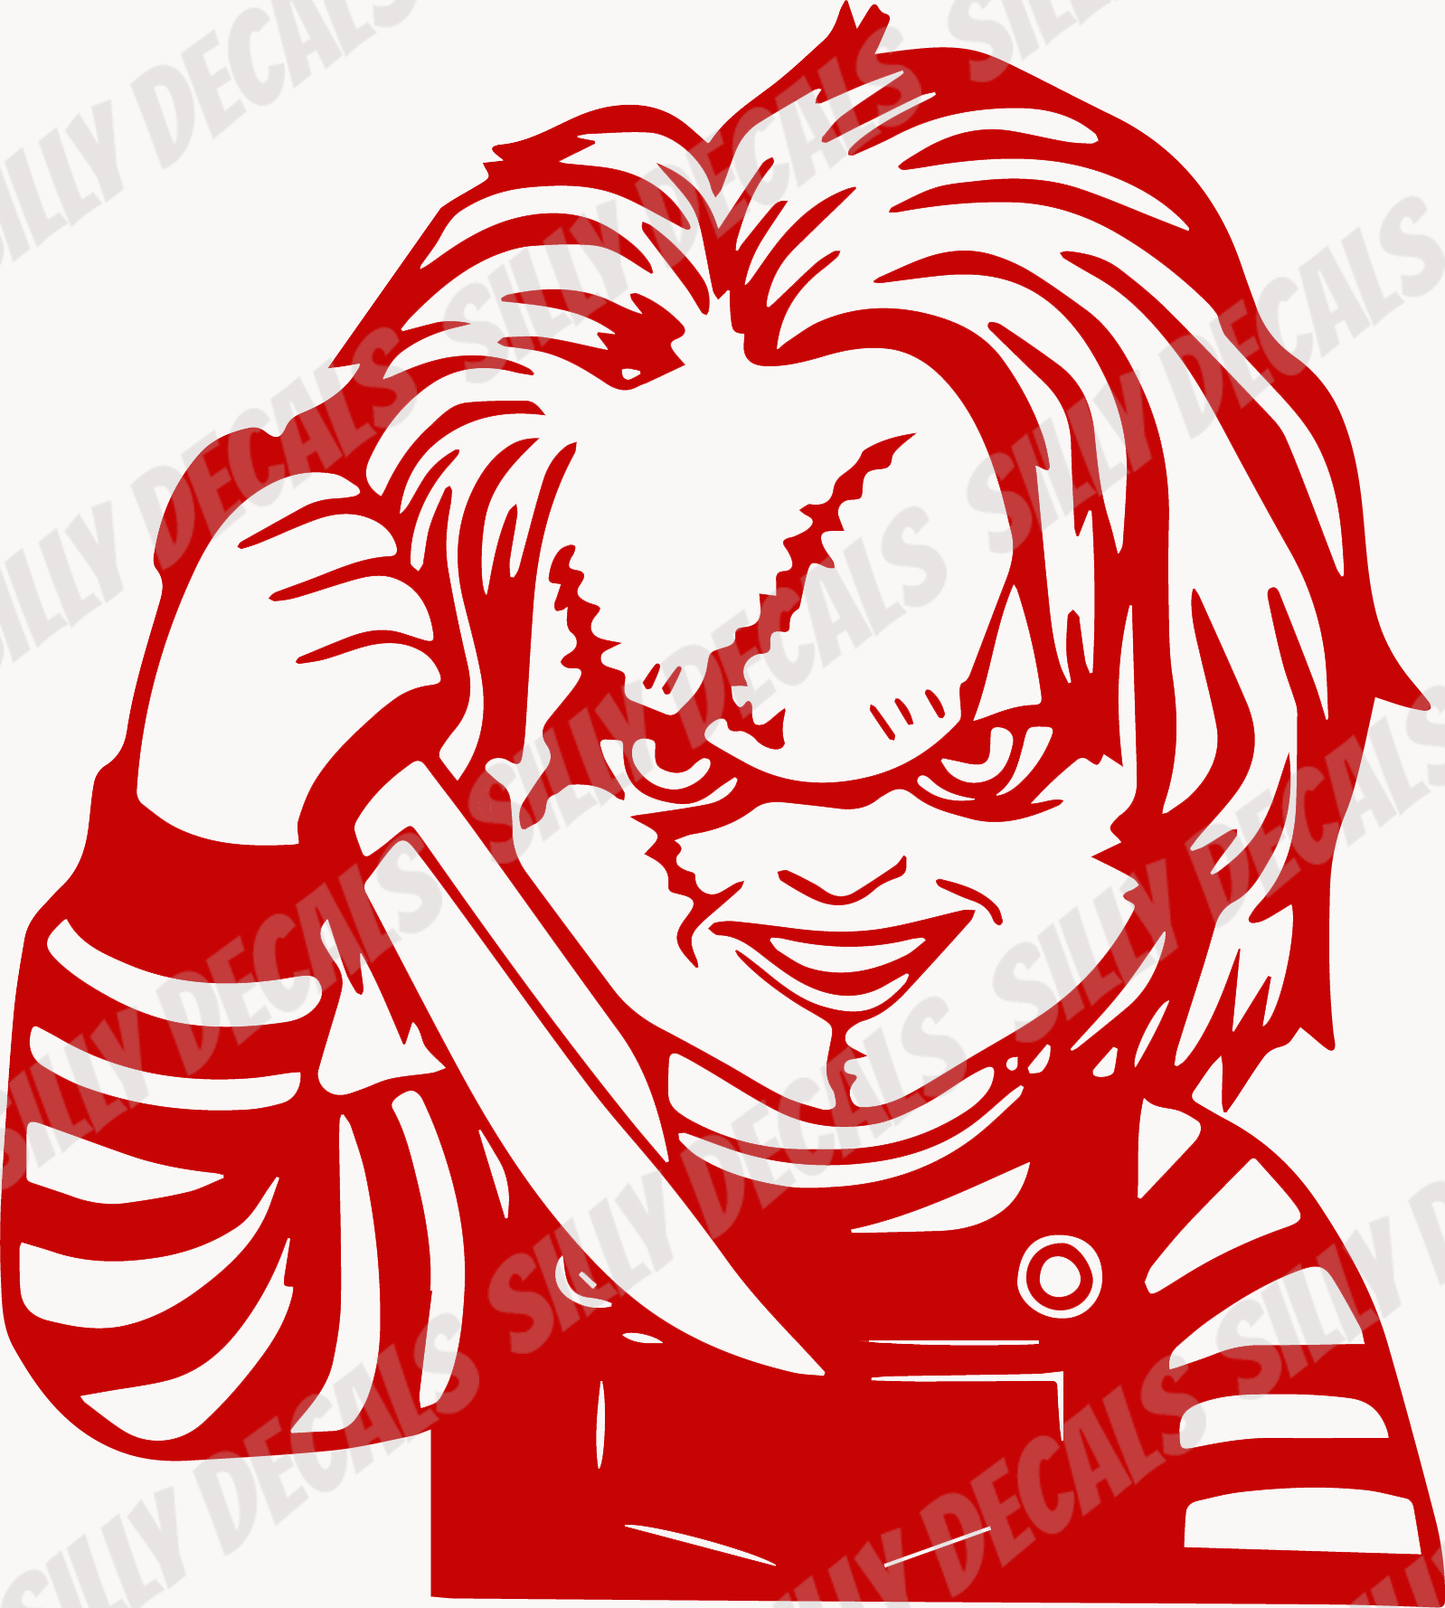 Halloween Character Holding Knife; Halloween Horror Vinyl Decals Suitable For Cars, Windows, Walls, and More!